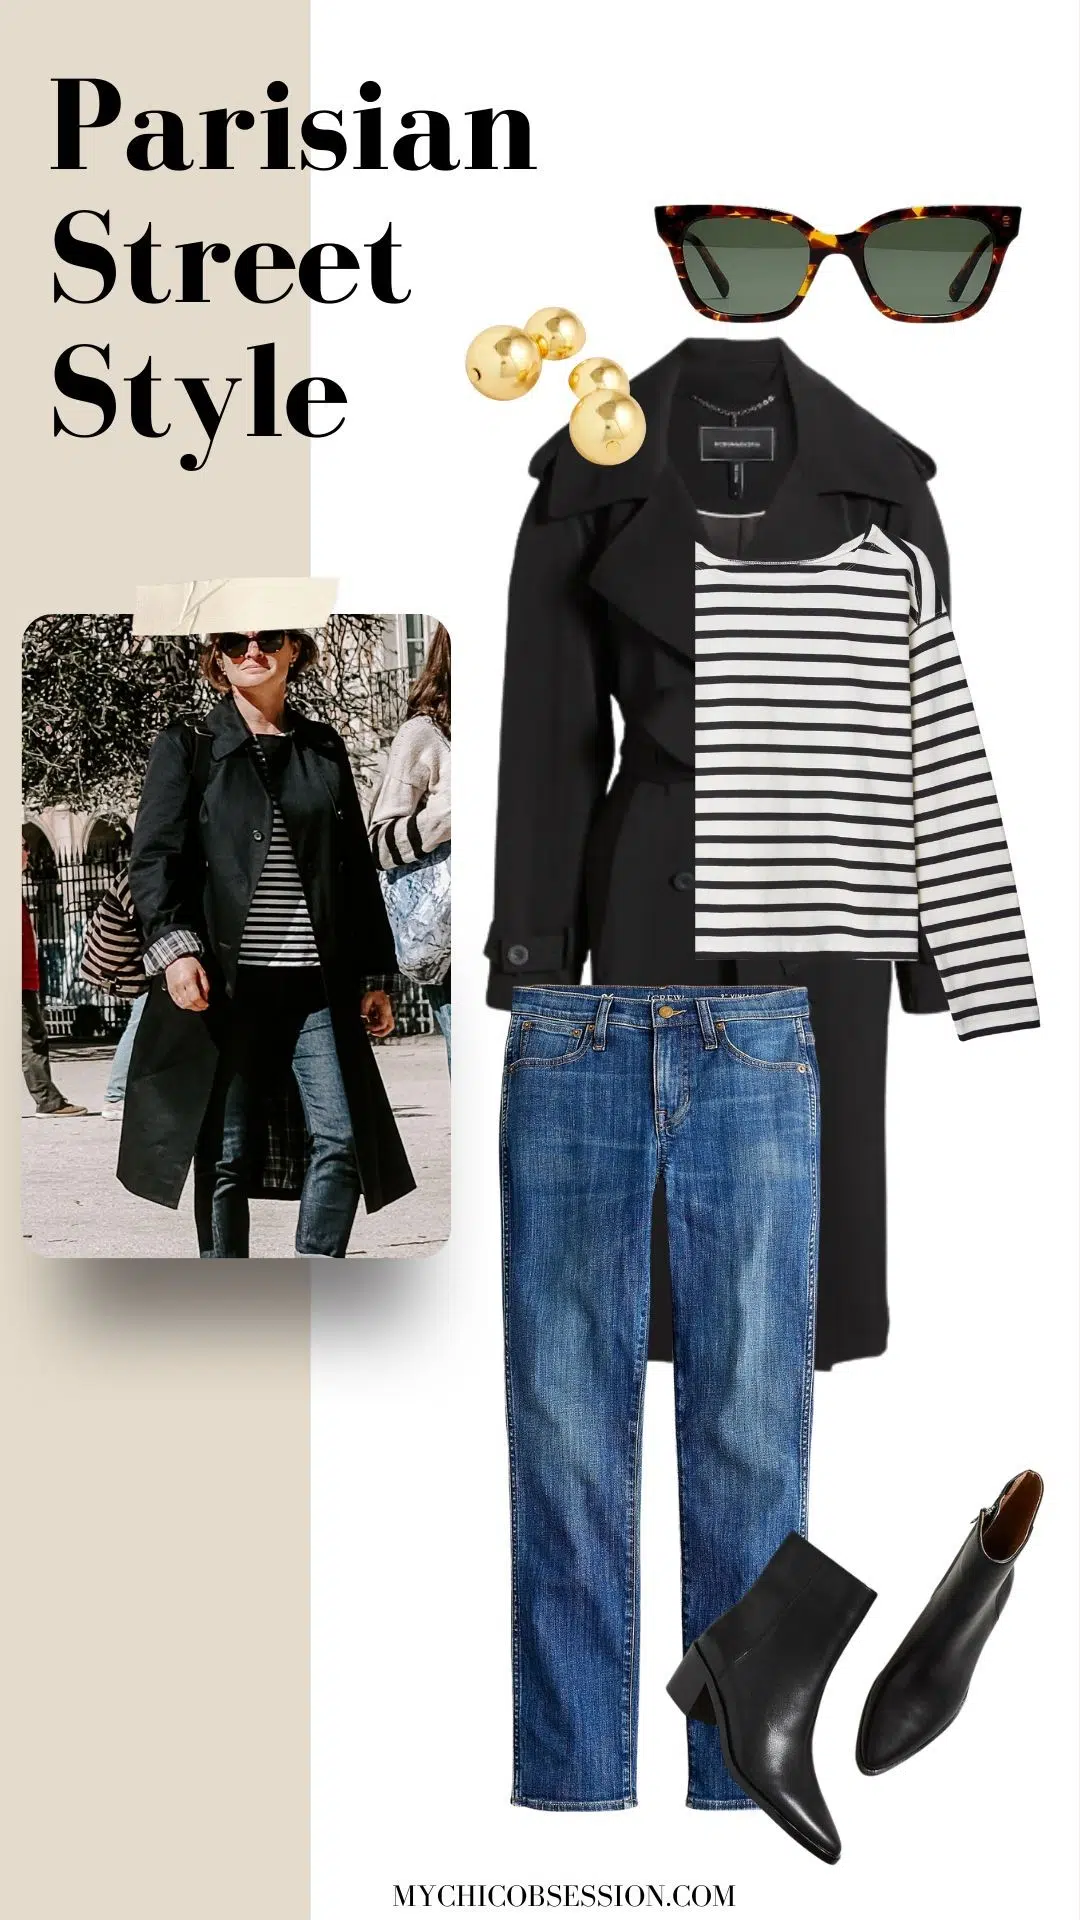 black trench coat + striped shirt + ankle boots